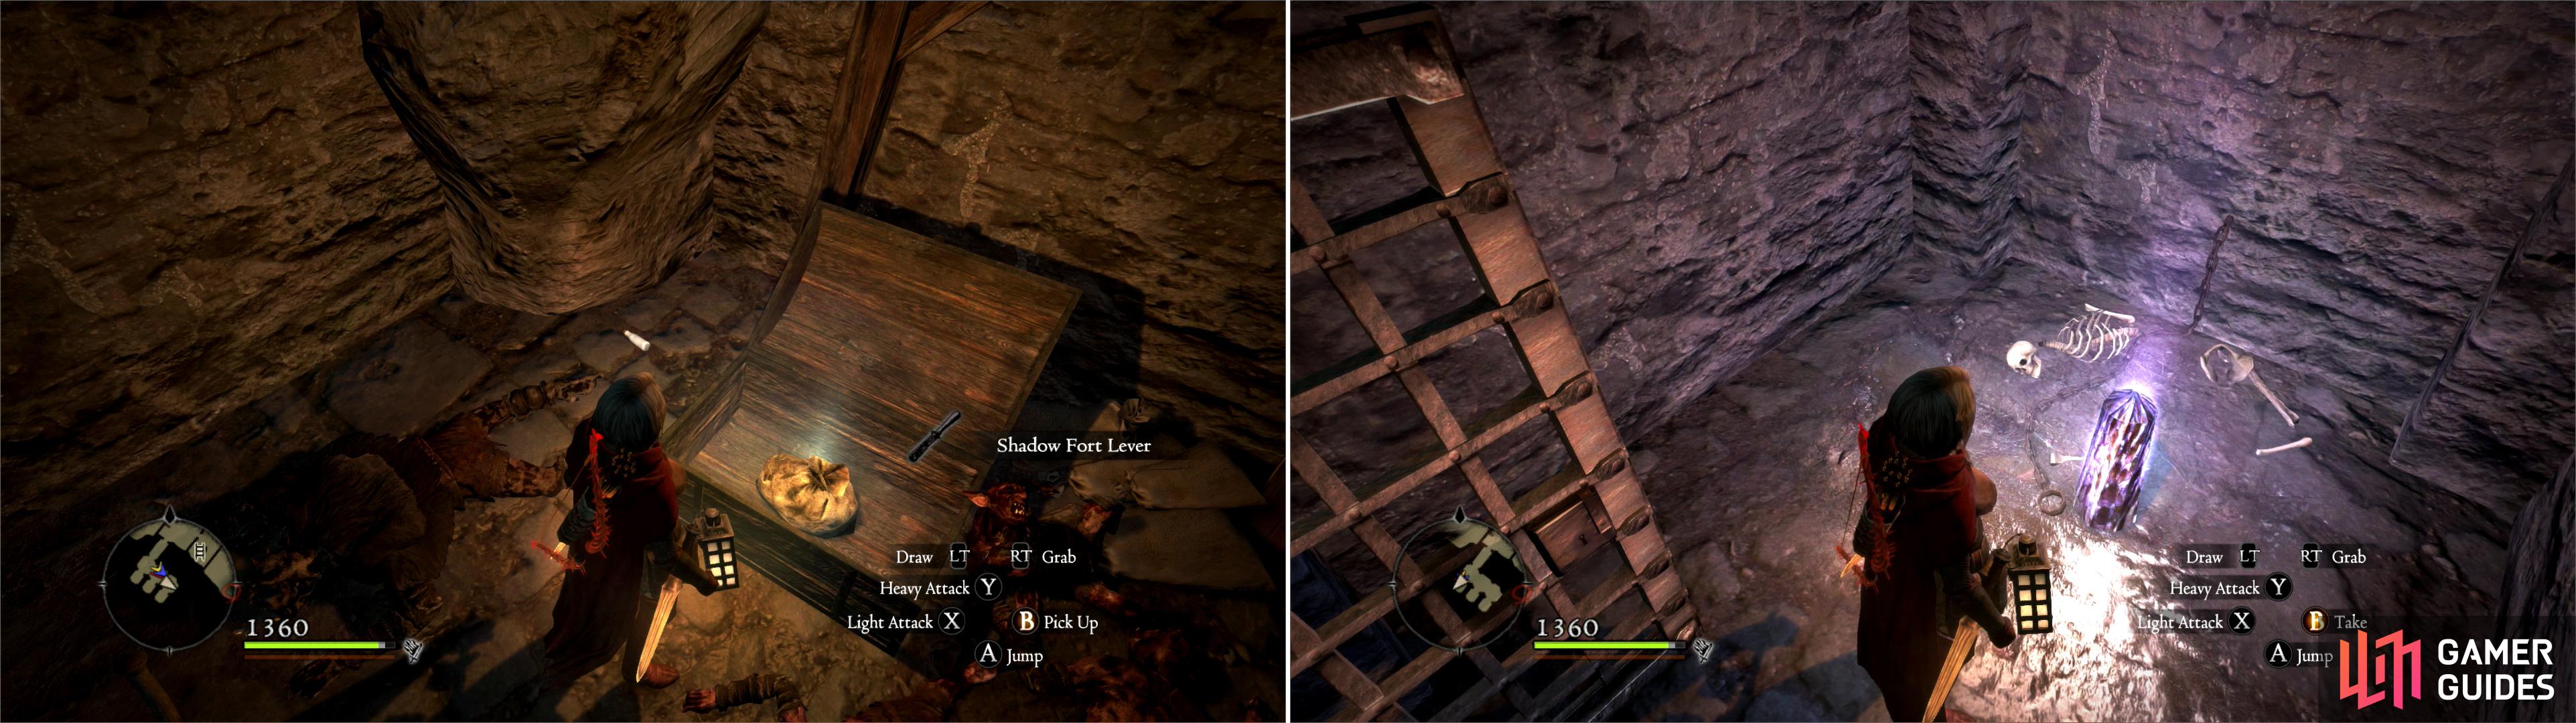 In the Station House structure you’ll find the Shadow Fort Lever (left) and a Portcrystal (right).